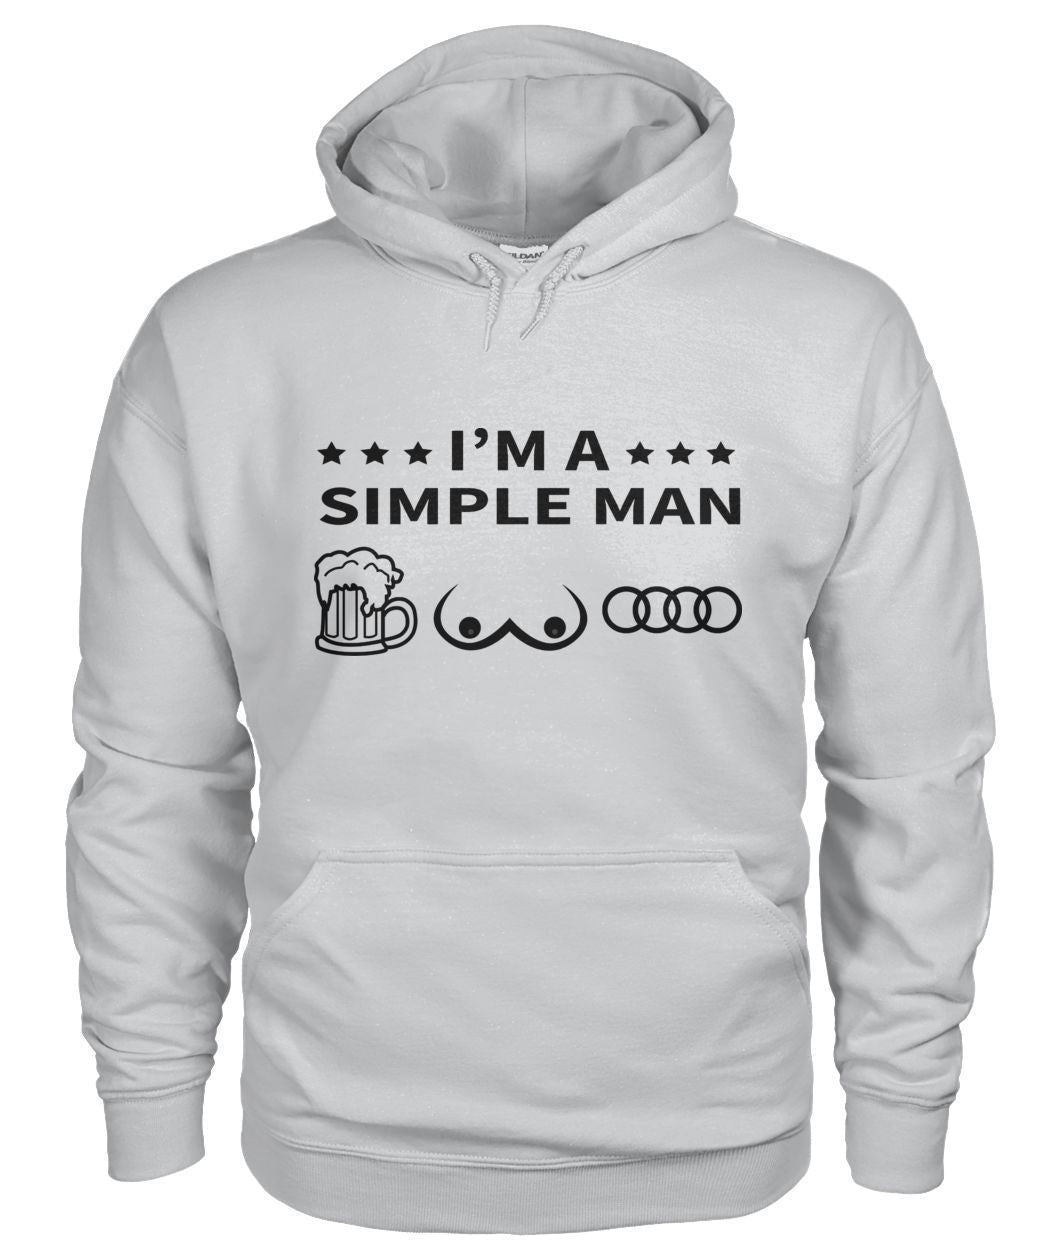 'I am a Simple Man' Hoodie - AudiLovers